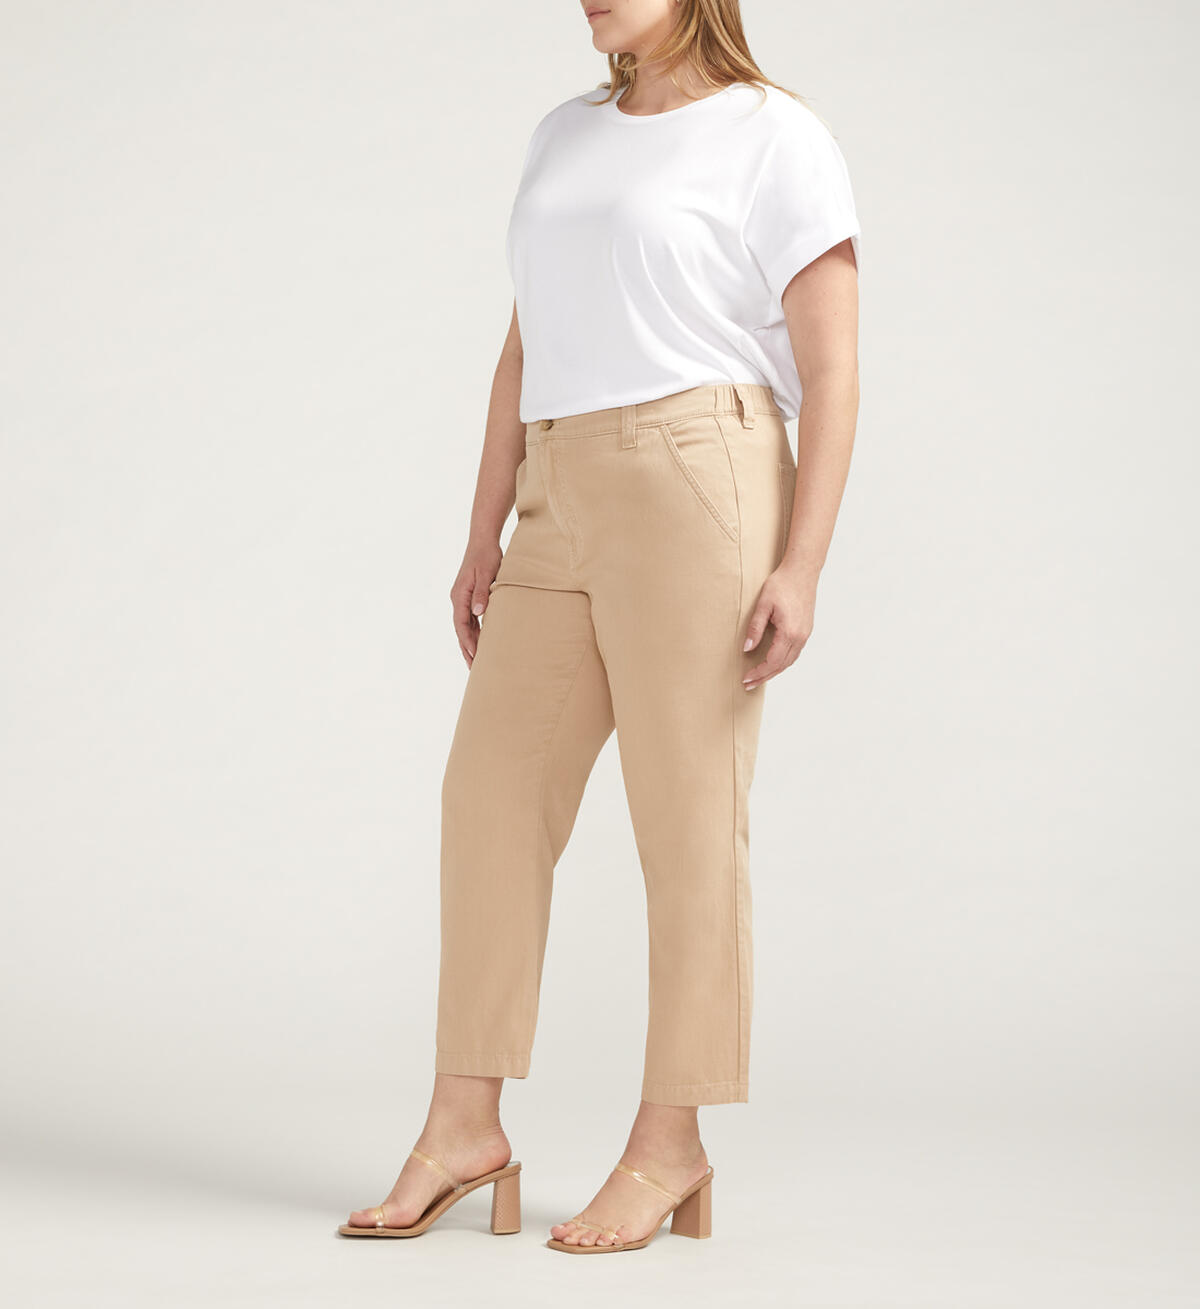 Chino Tailored Cropped Pants Plus Size, , hi-res image number 2